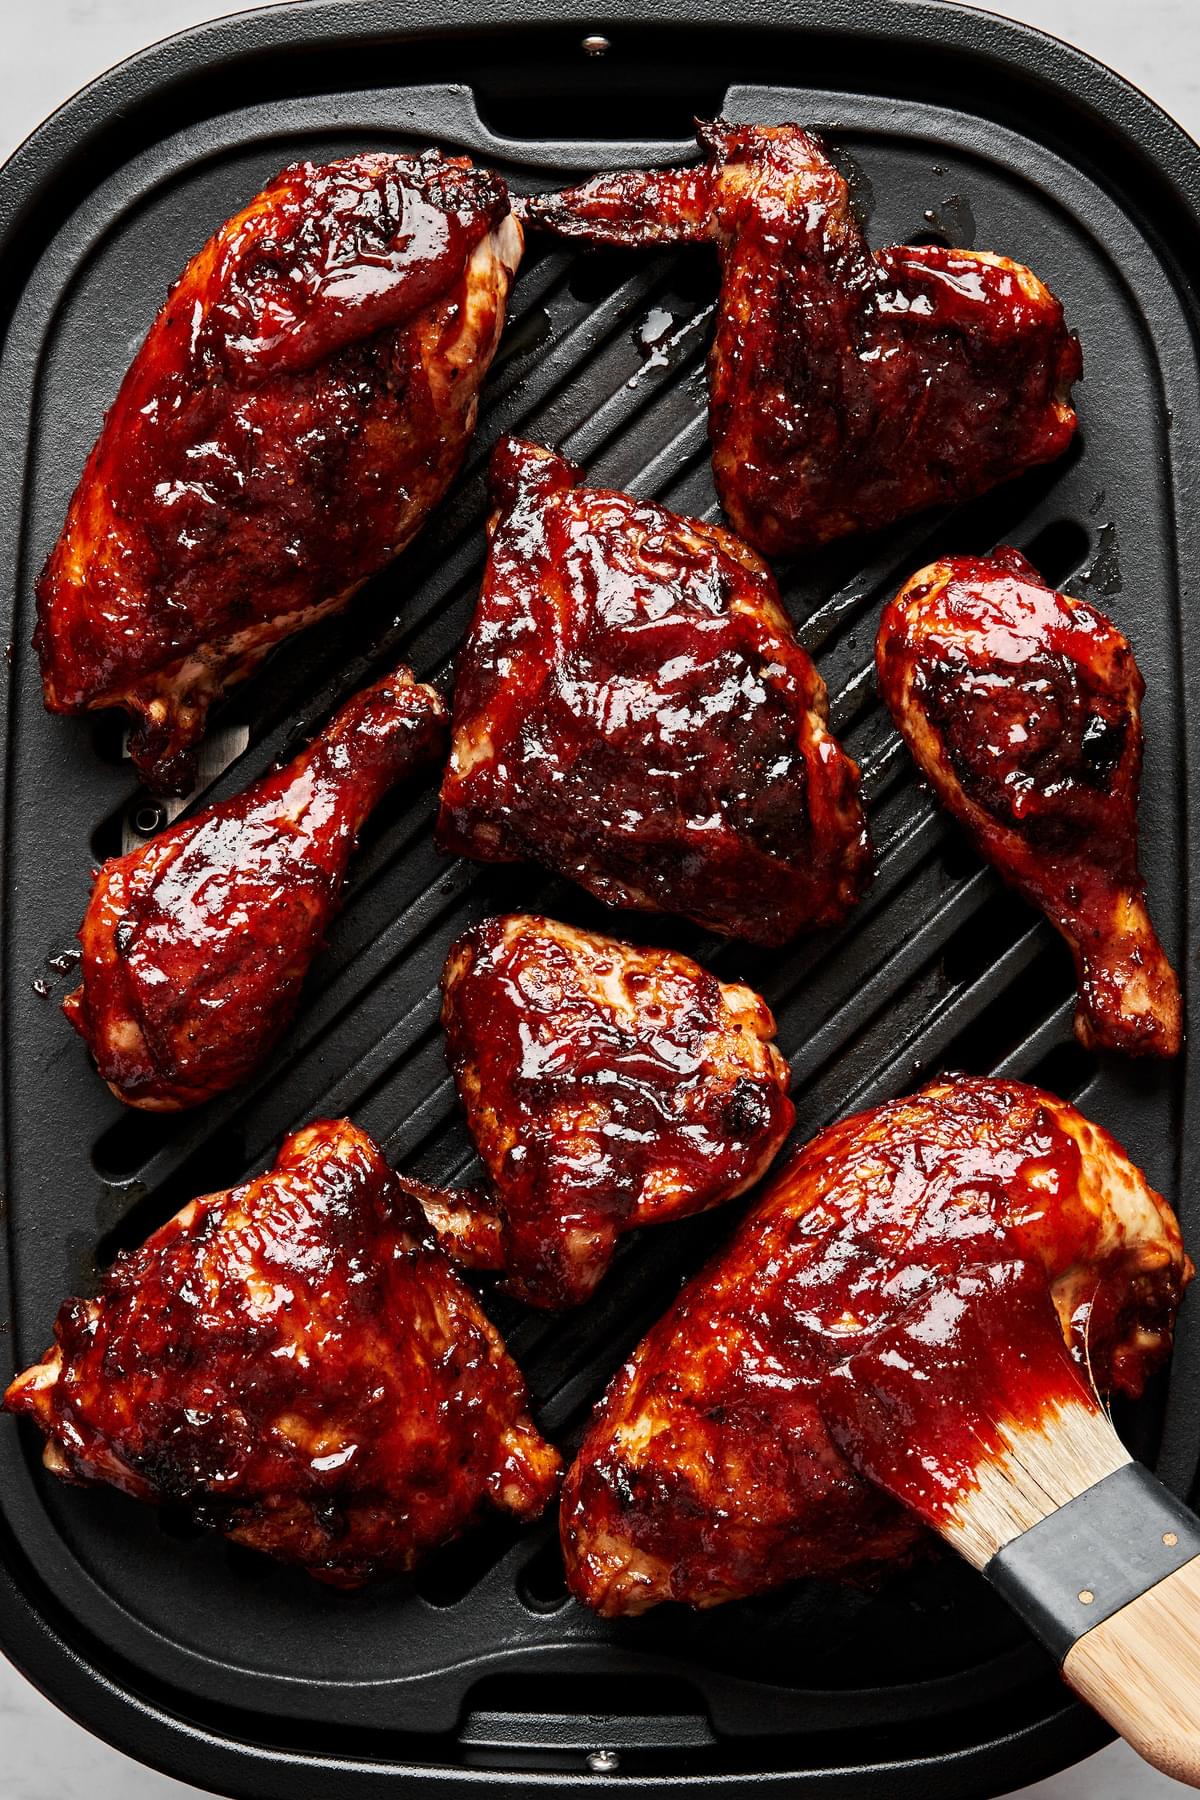 3 pounds chicken legs, thighs, wings and breasts being cooked on the grill and brushed with bbq sauce